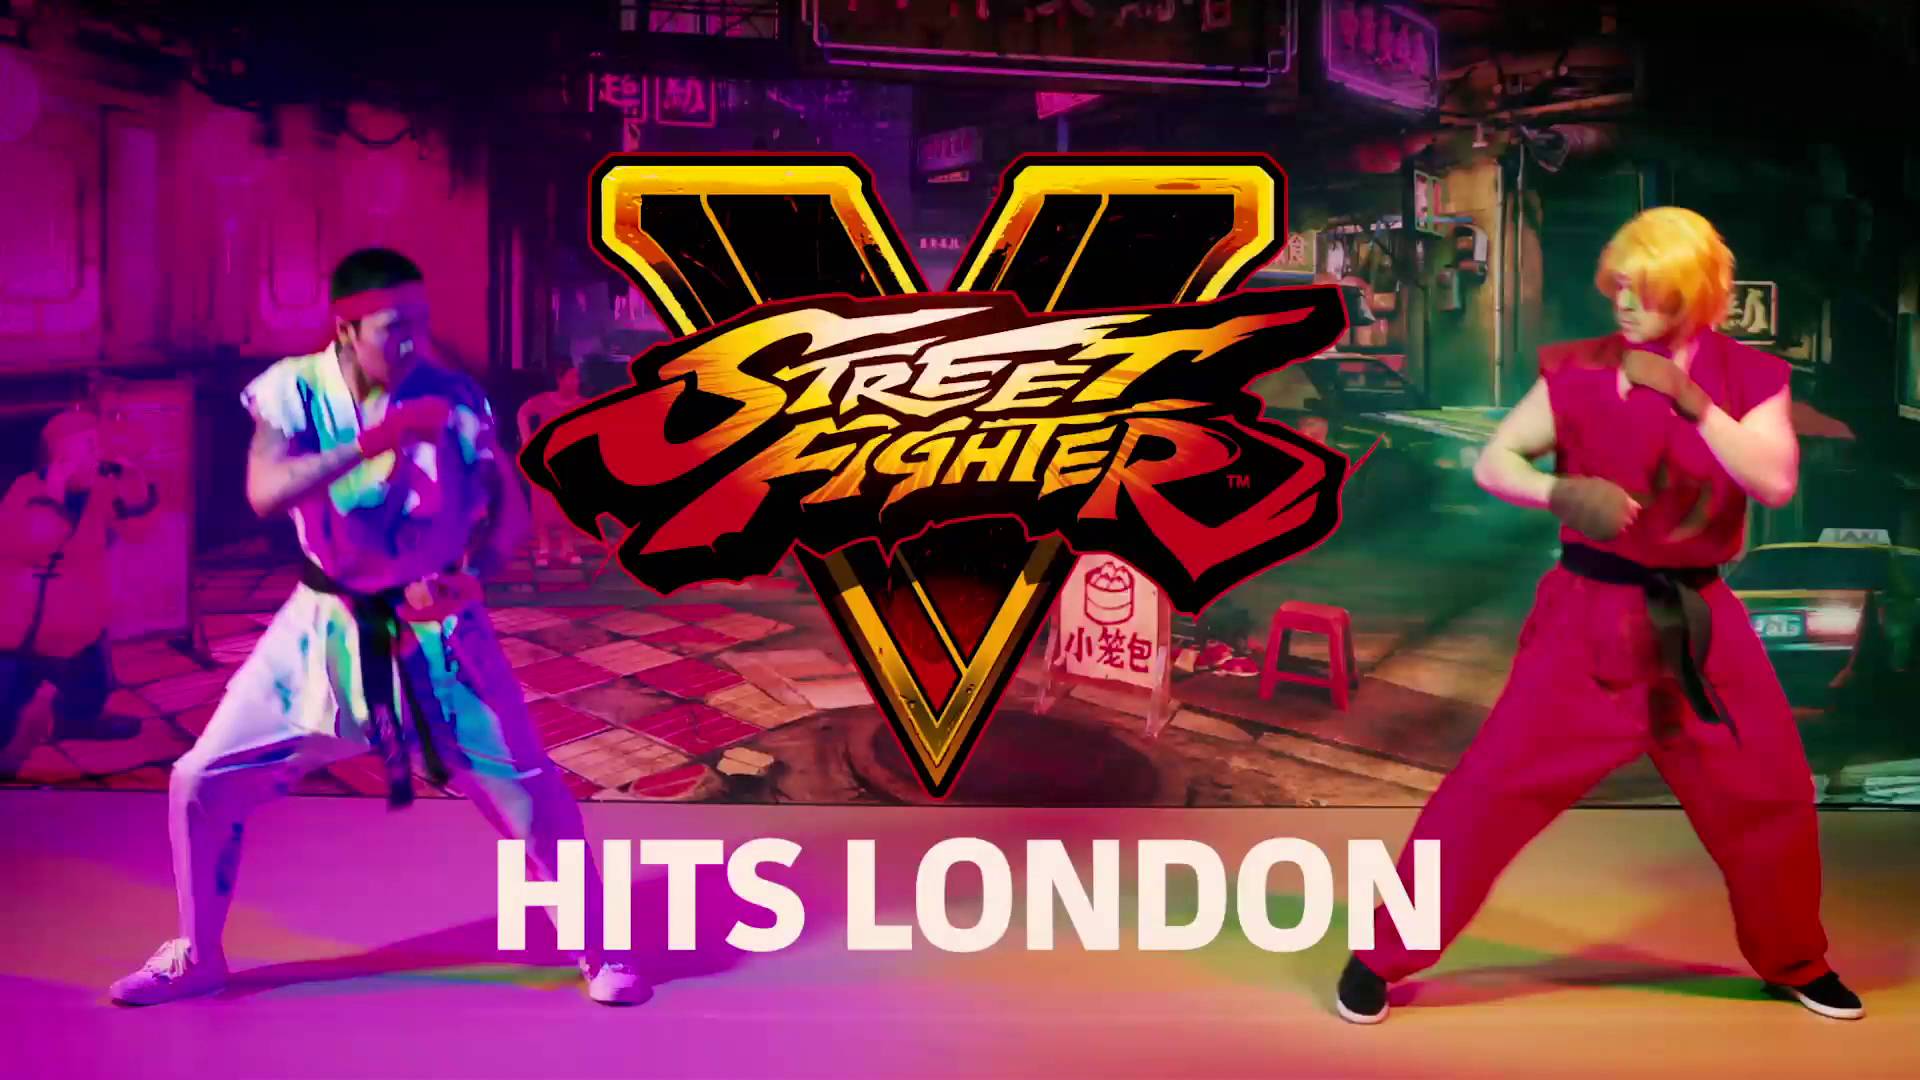 Street Fighter V Hits London - Live Action Performance